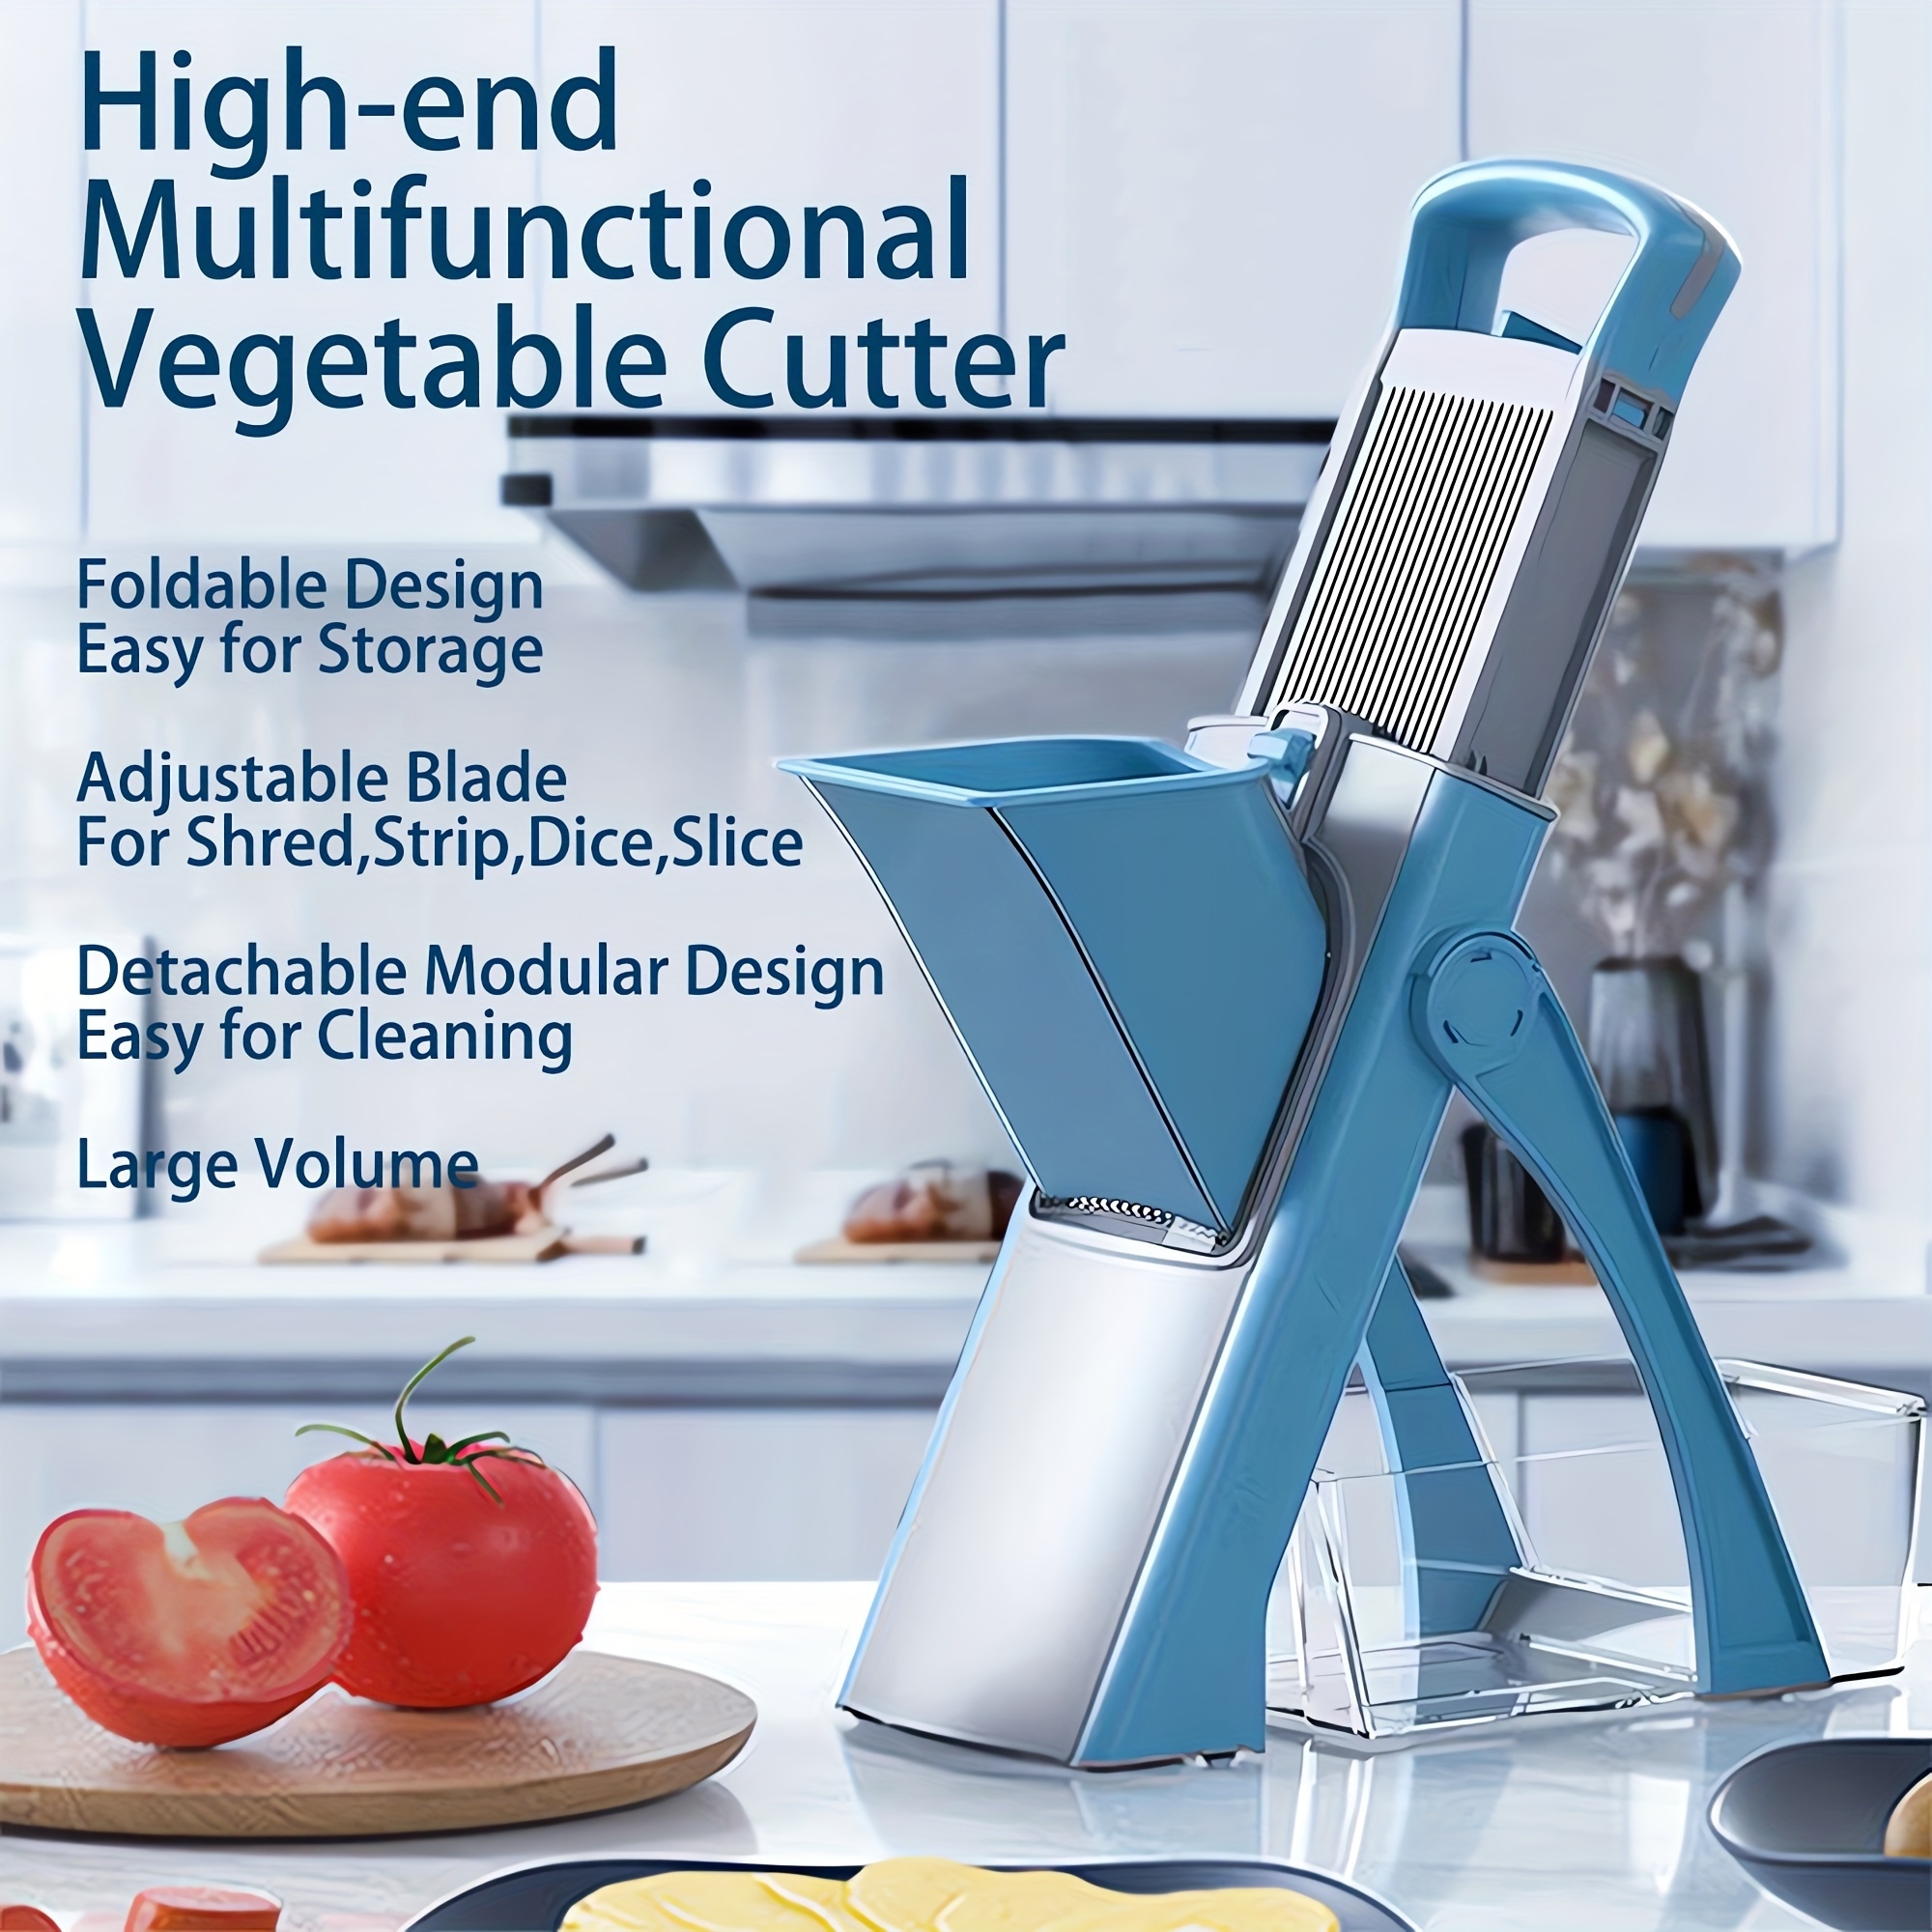 

Multifunctional Vegetable Slicer Set - Abs Manual Food Grater With Container - Fruit & Vegetable Cutter For Shredding, Slicing, Stripping & Dicing - Potato Grater, Onion Mincer Kitchen Gadget